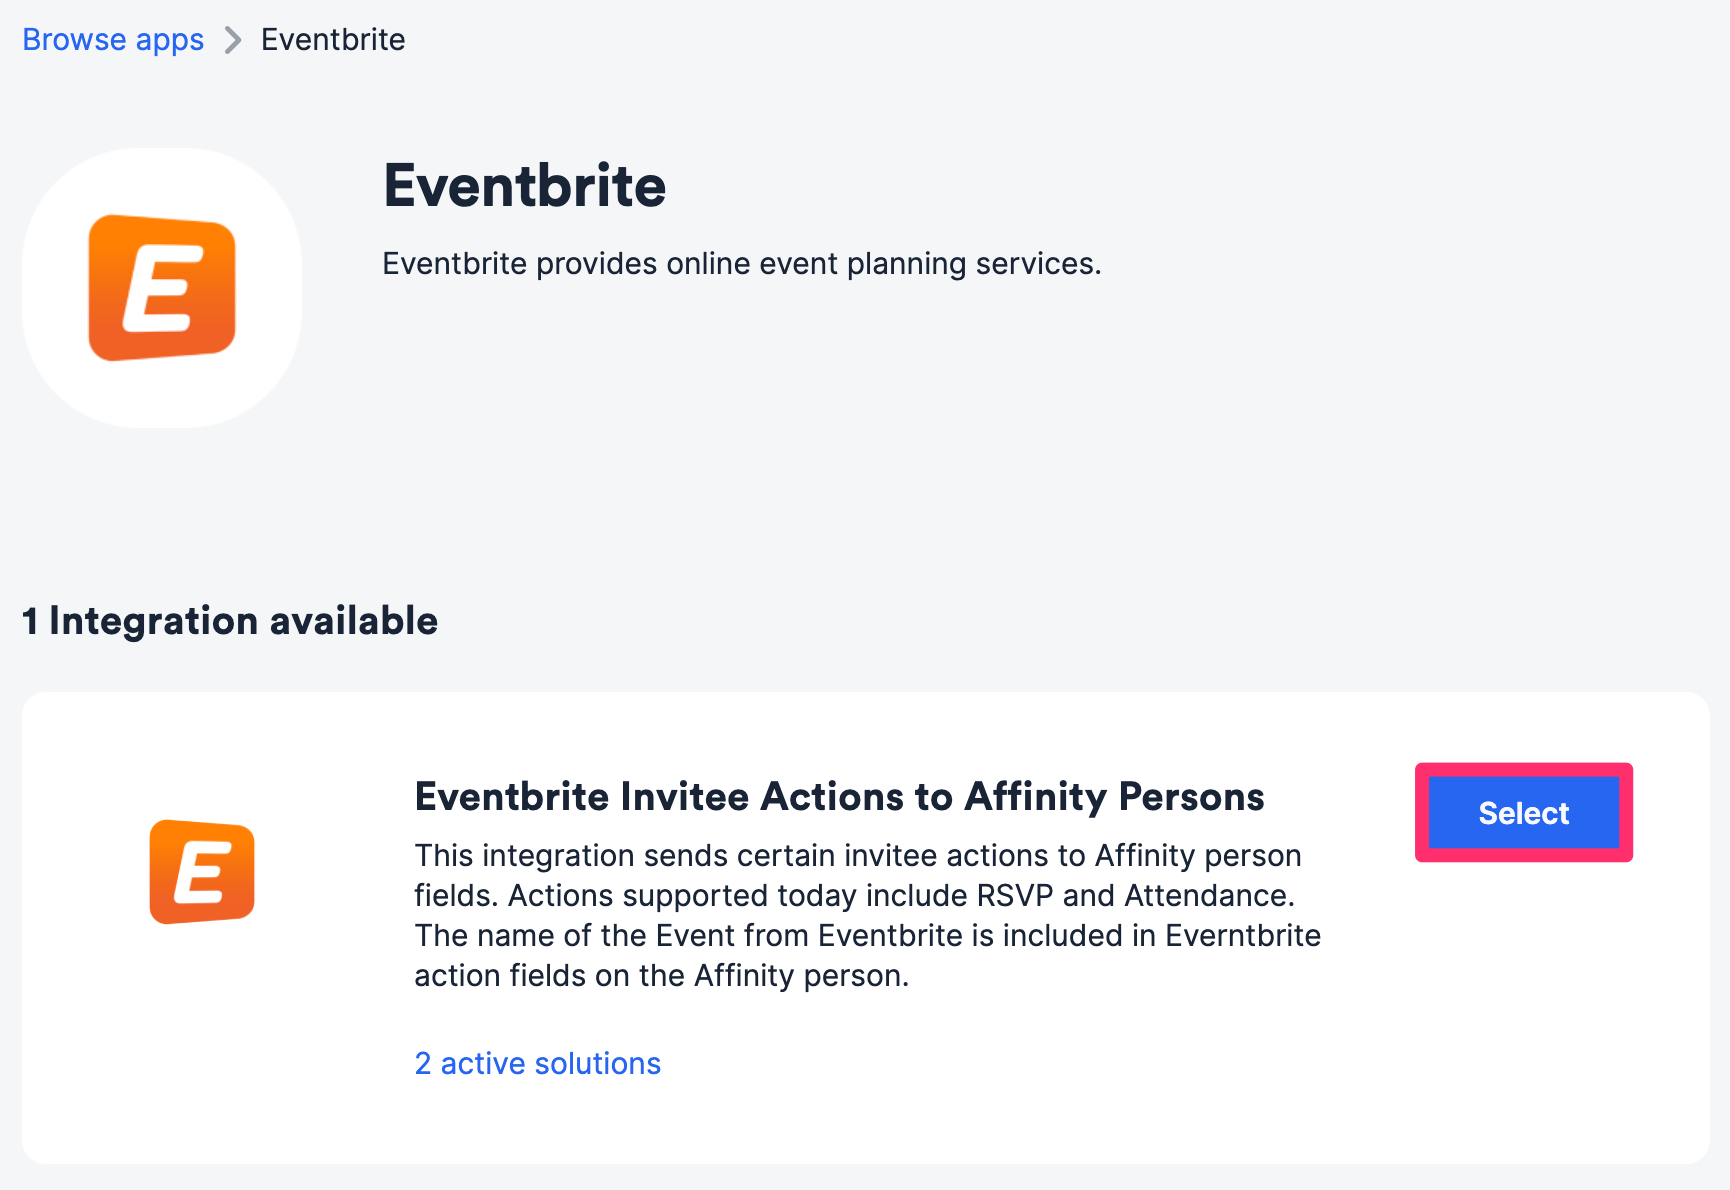 Eventbrite_Invitee_Actions_to_Affinity_Persons.png